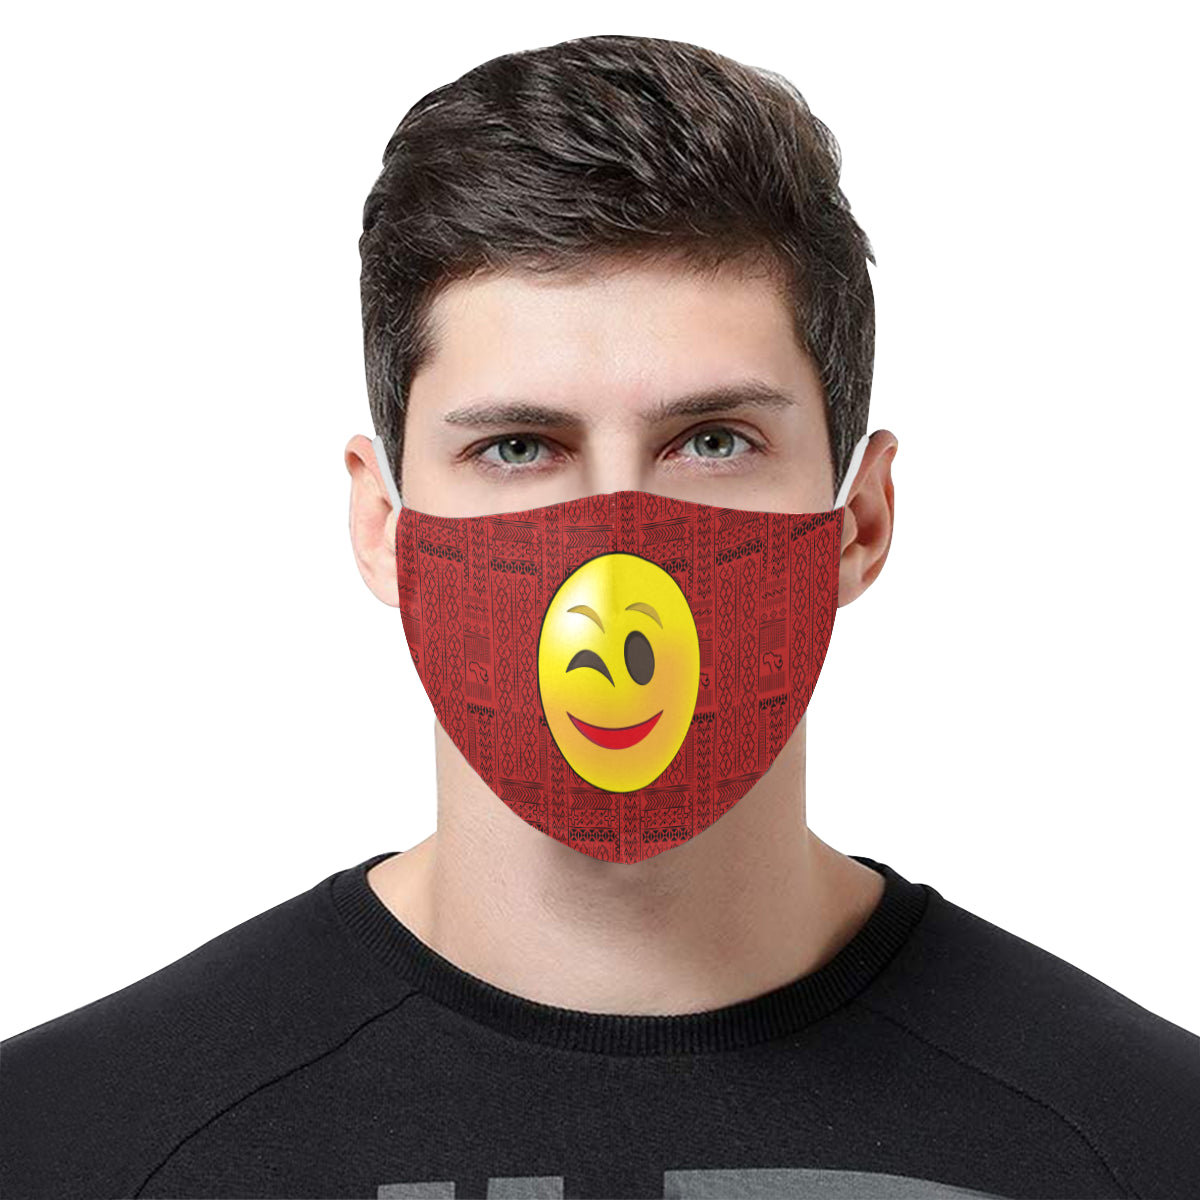 Wink Tribal Print Emoji Cotton Fabric Face Mask with Filter Slot and Adjustable Strap - Non-medical use (2 Filters Included)